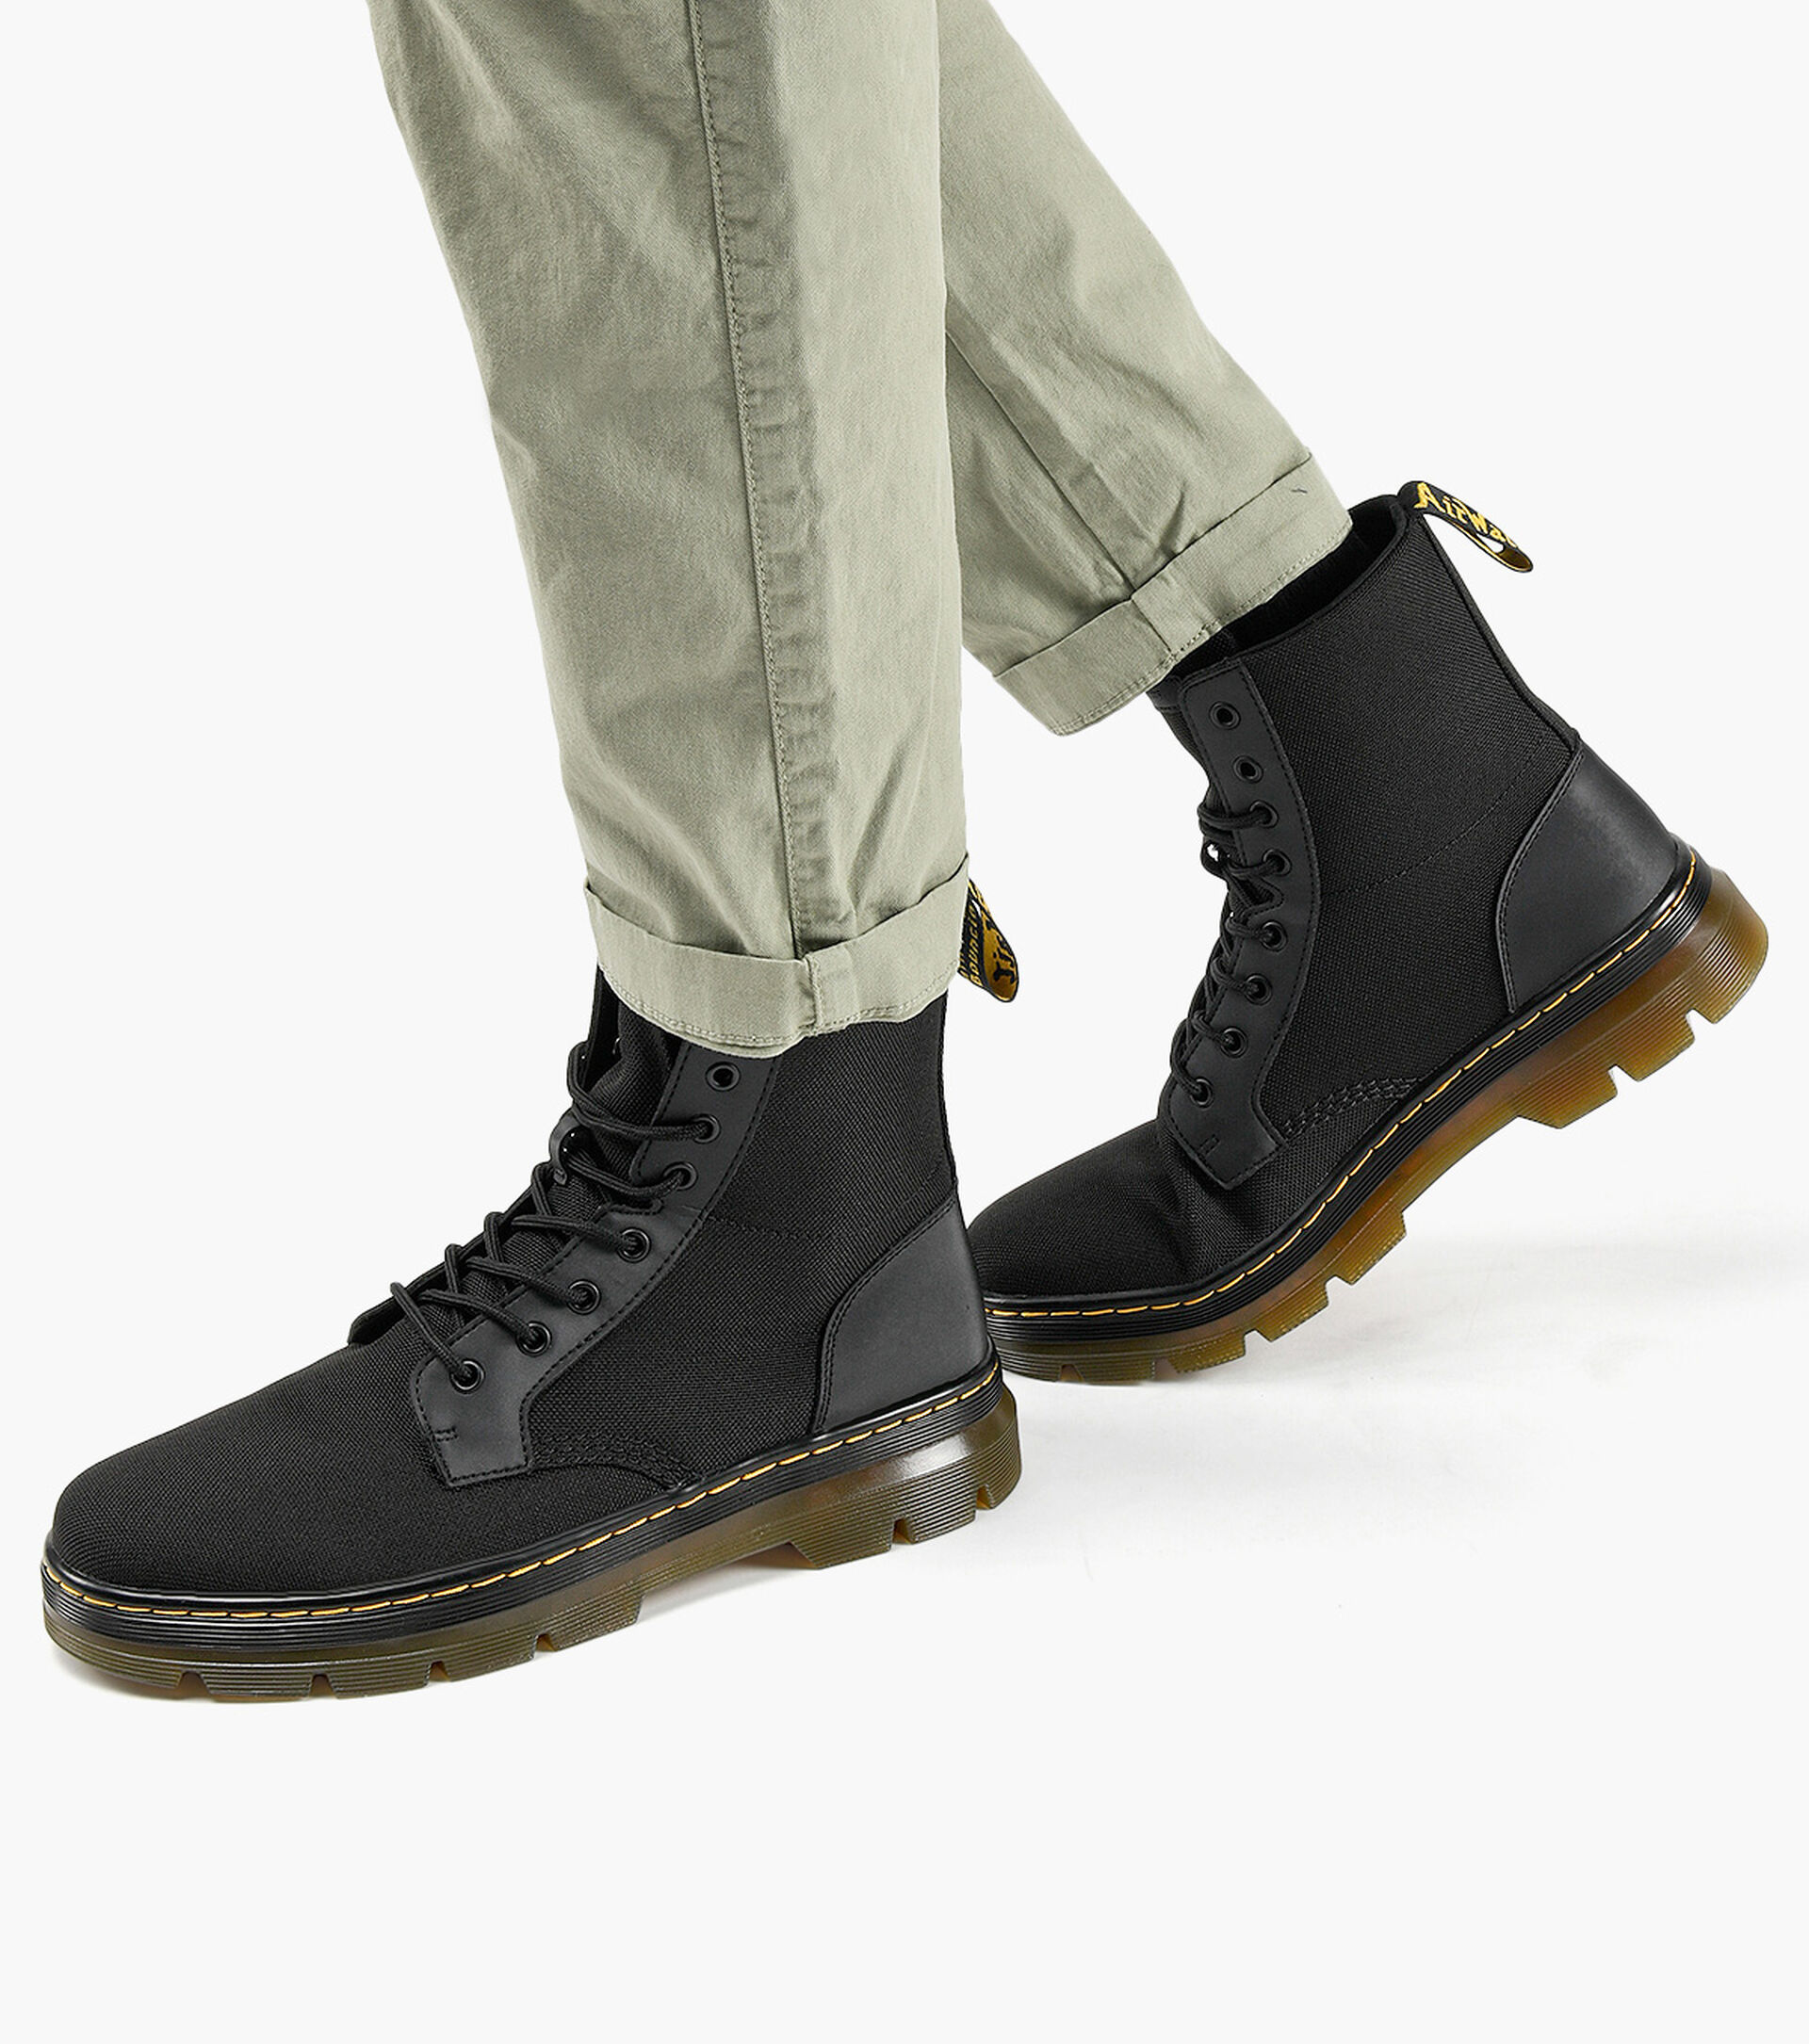 DR. MARTENS COMBS POLY CASUAL BOOTS - Black Fabric | Browns Shoes